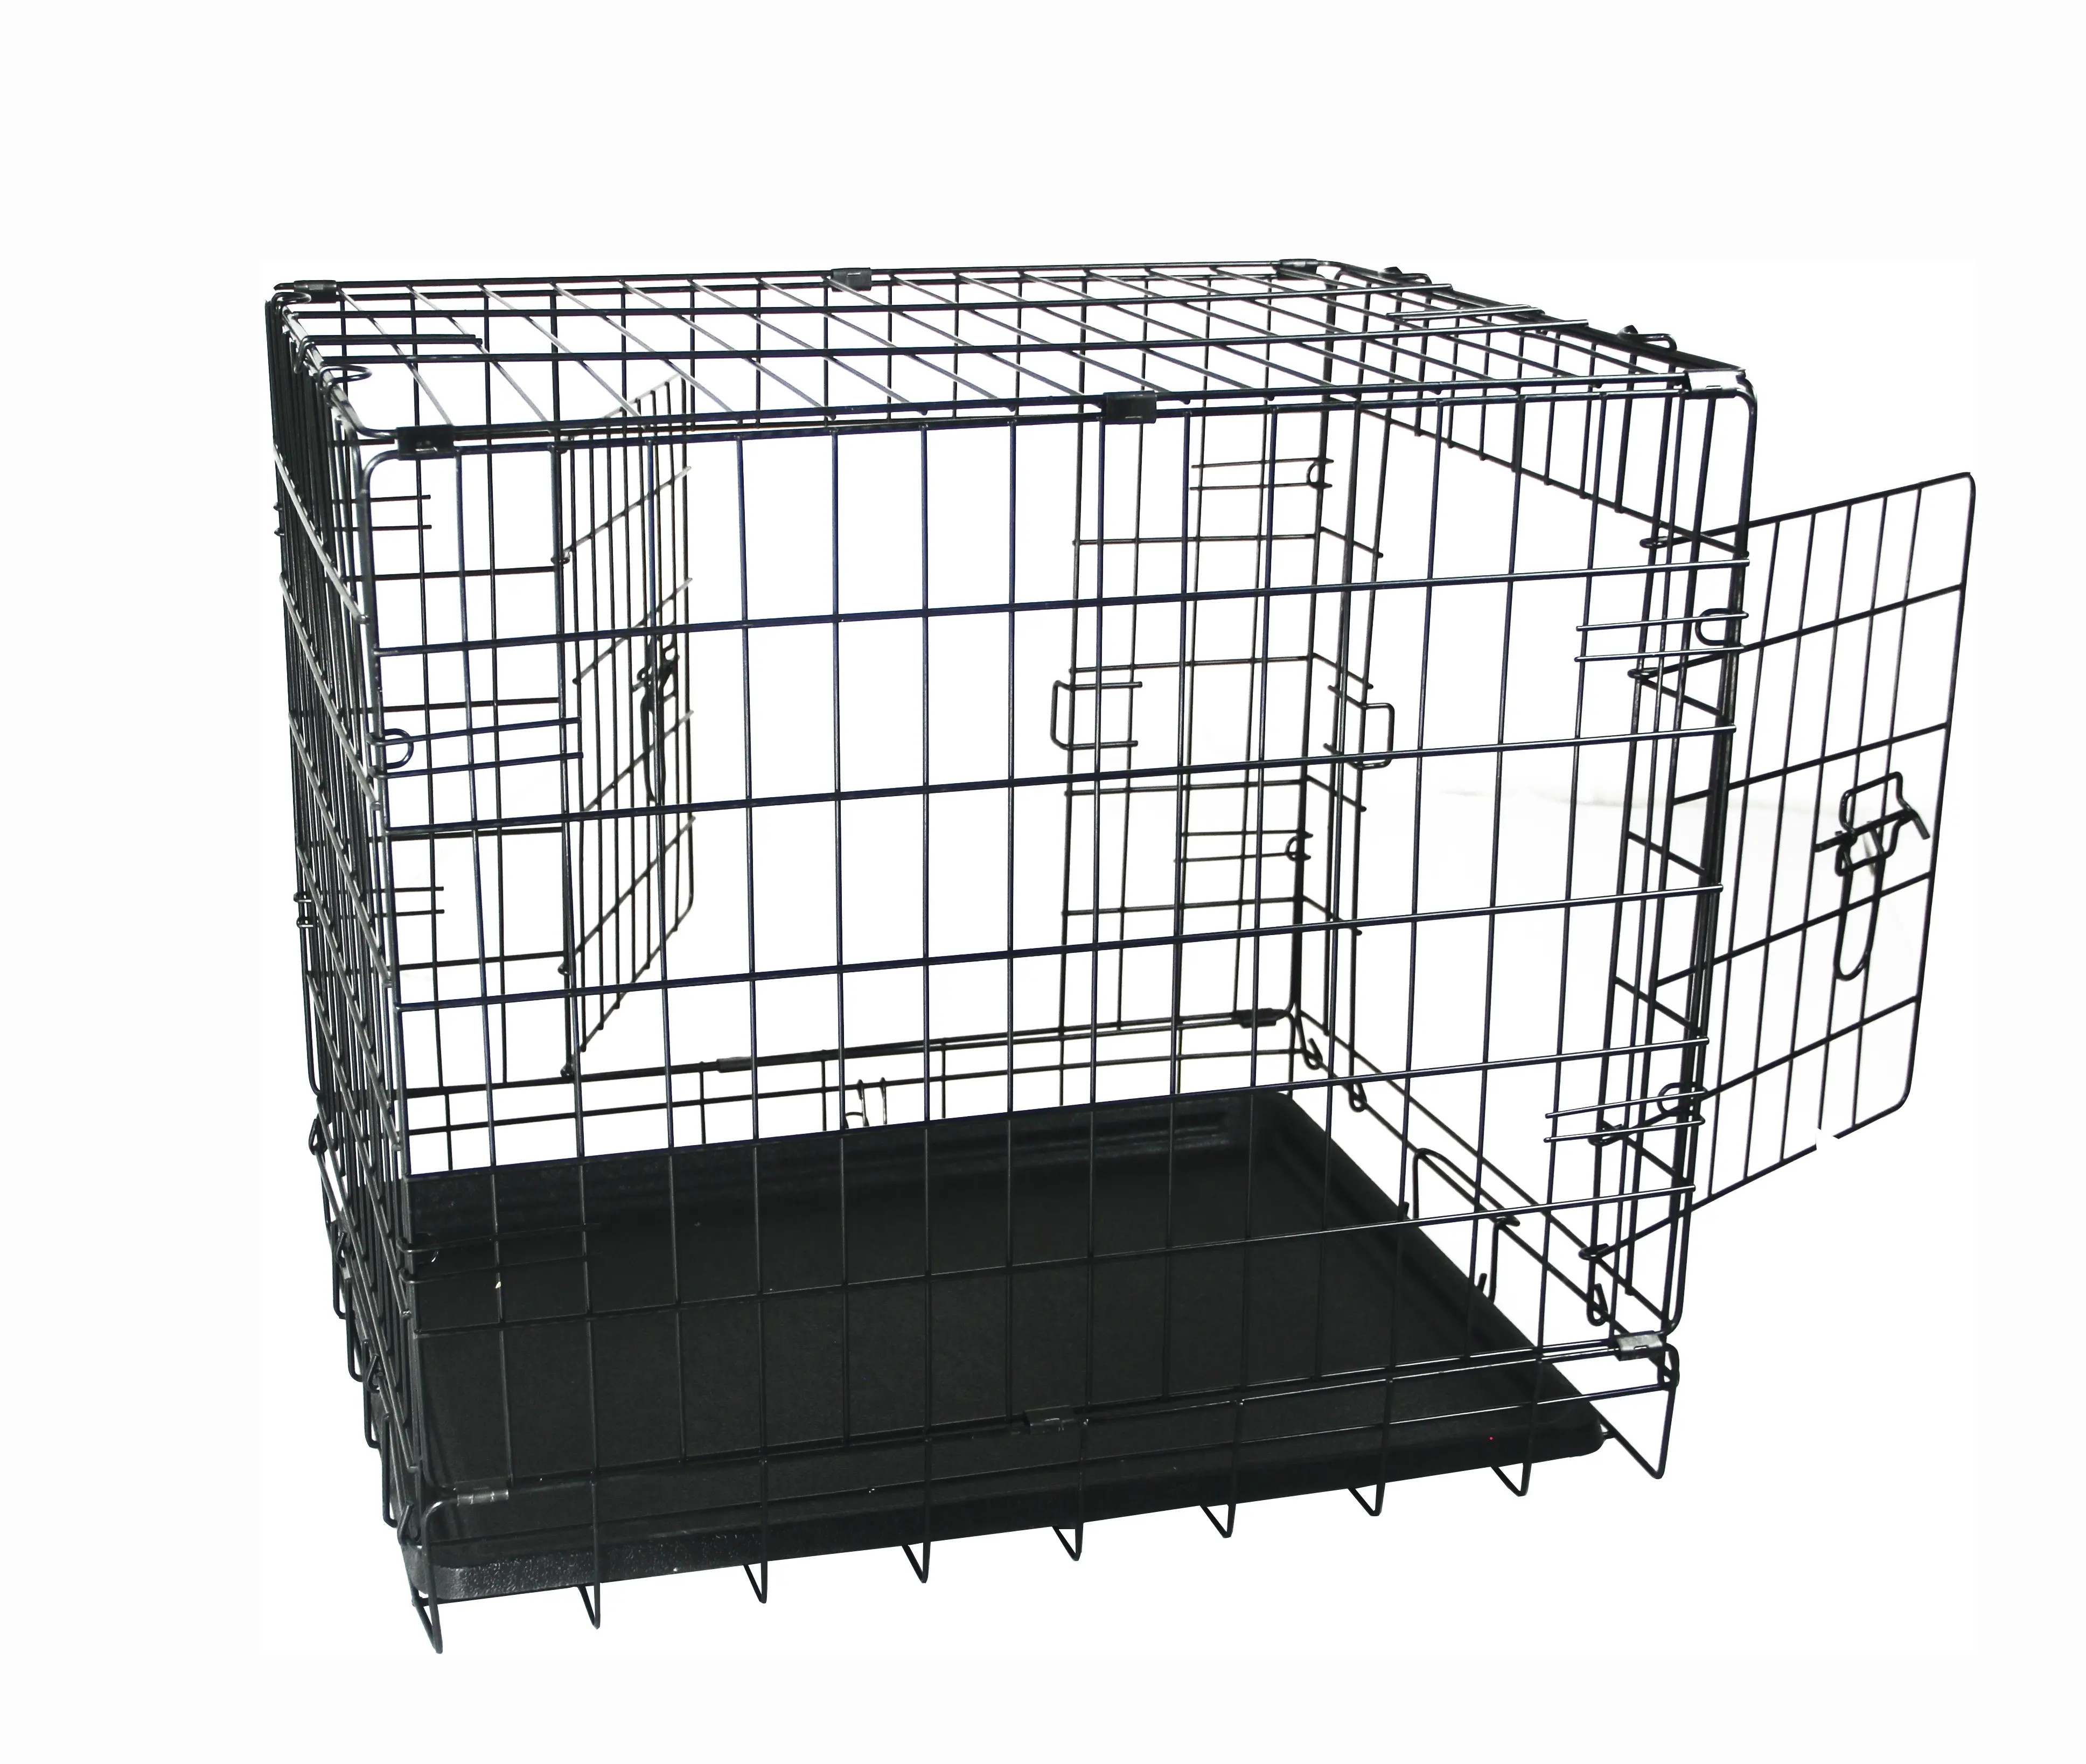 Hot Sale Foldable Pet Carrier Iron Wire Dog Cage Crate Kennel Carriers & Waterproof cover